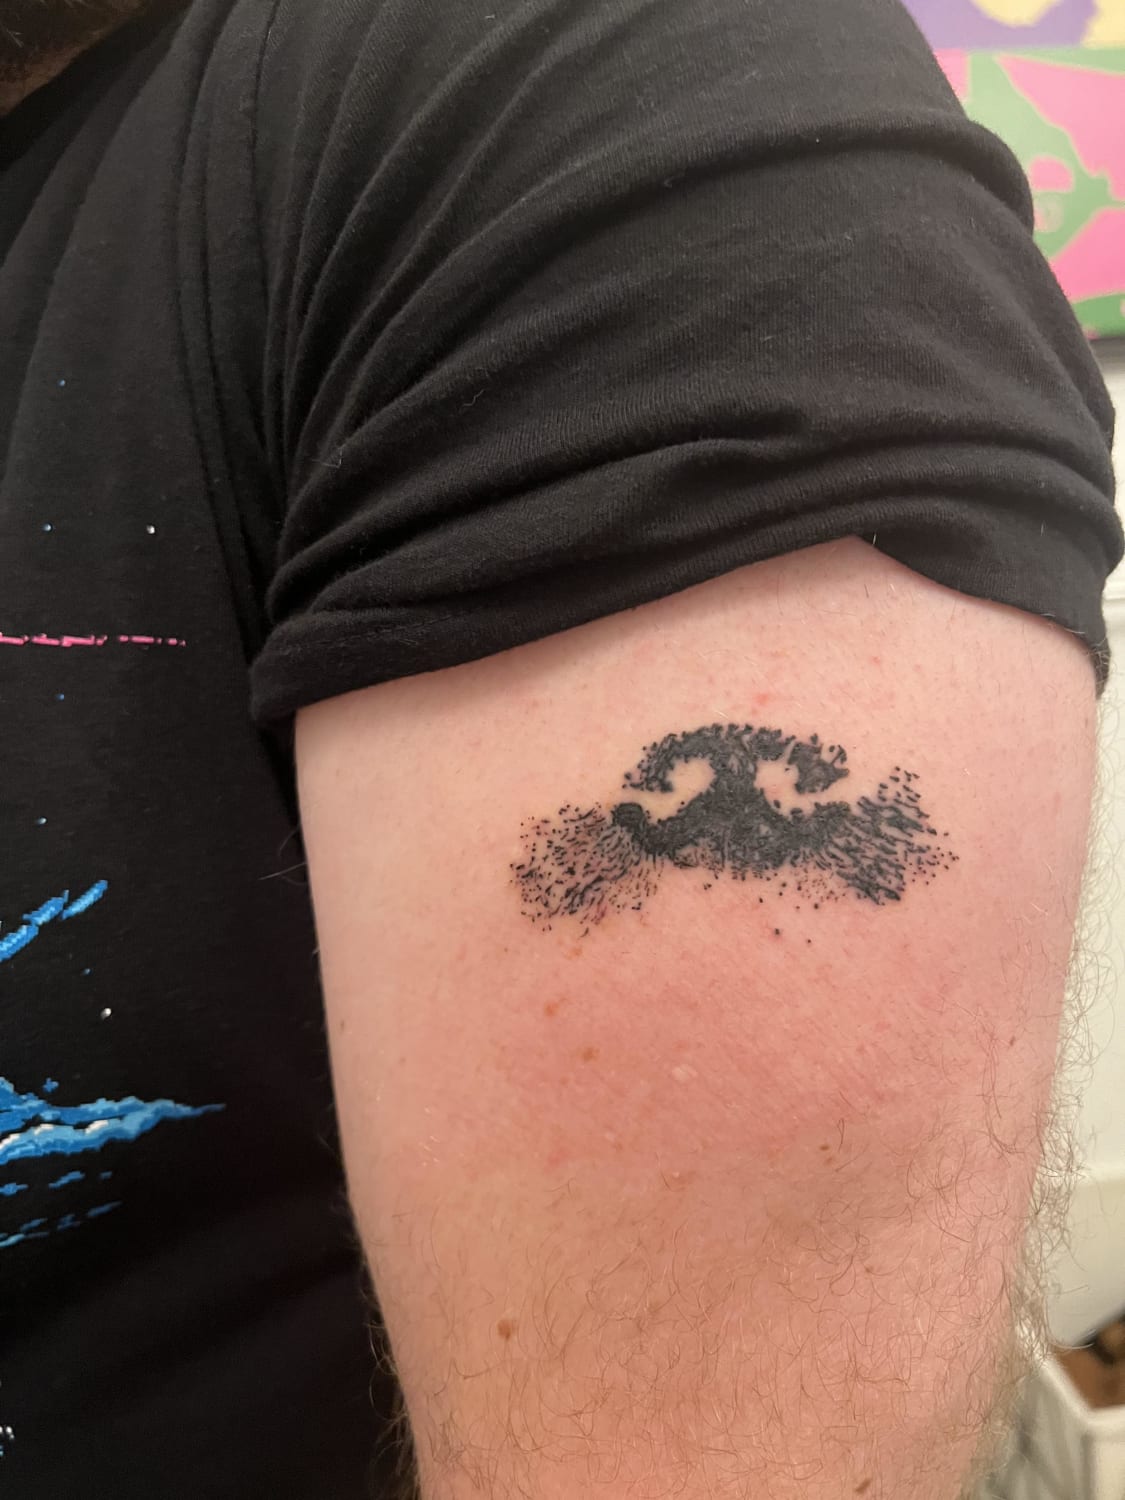 Memorial tattoo(nose print) of my recently passed pup Zero done at The Golden Rule in Phoenix, Arizona